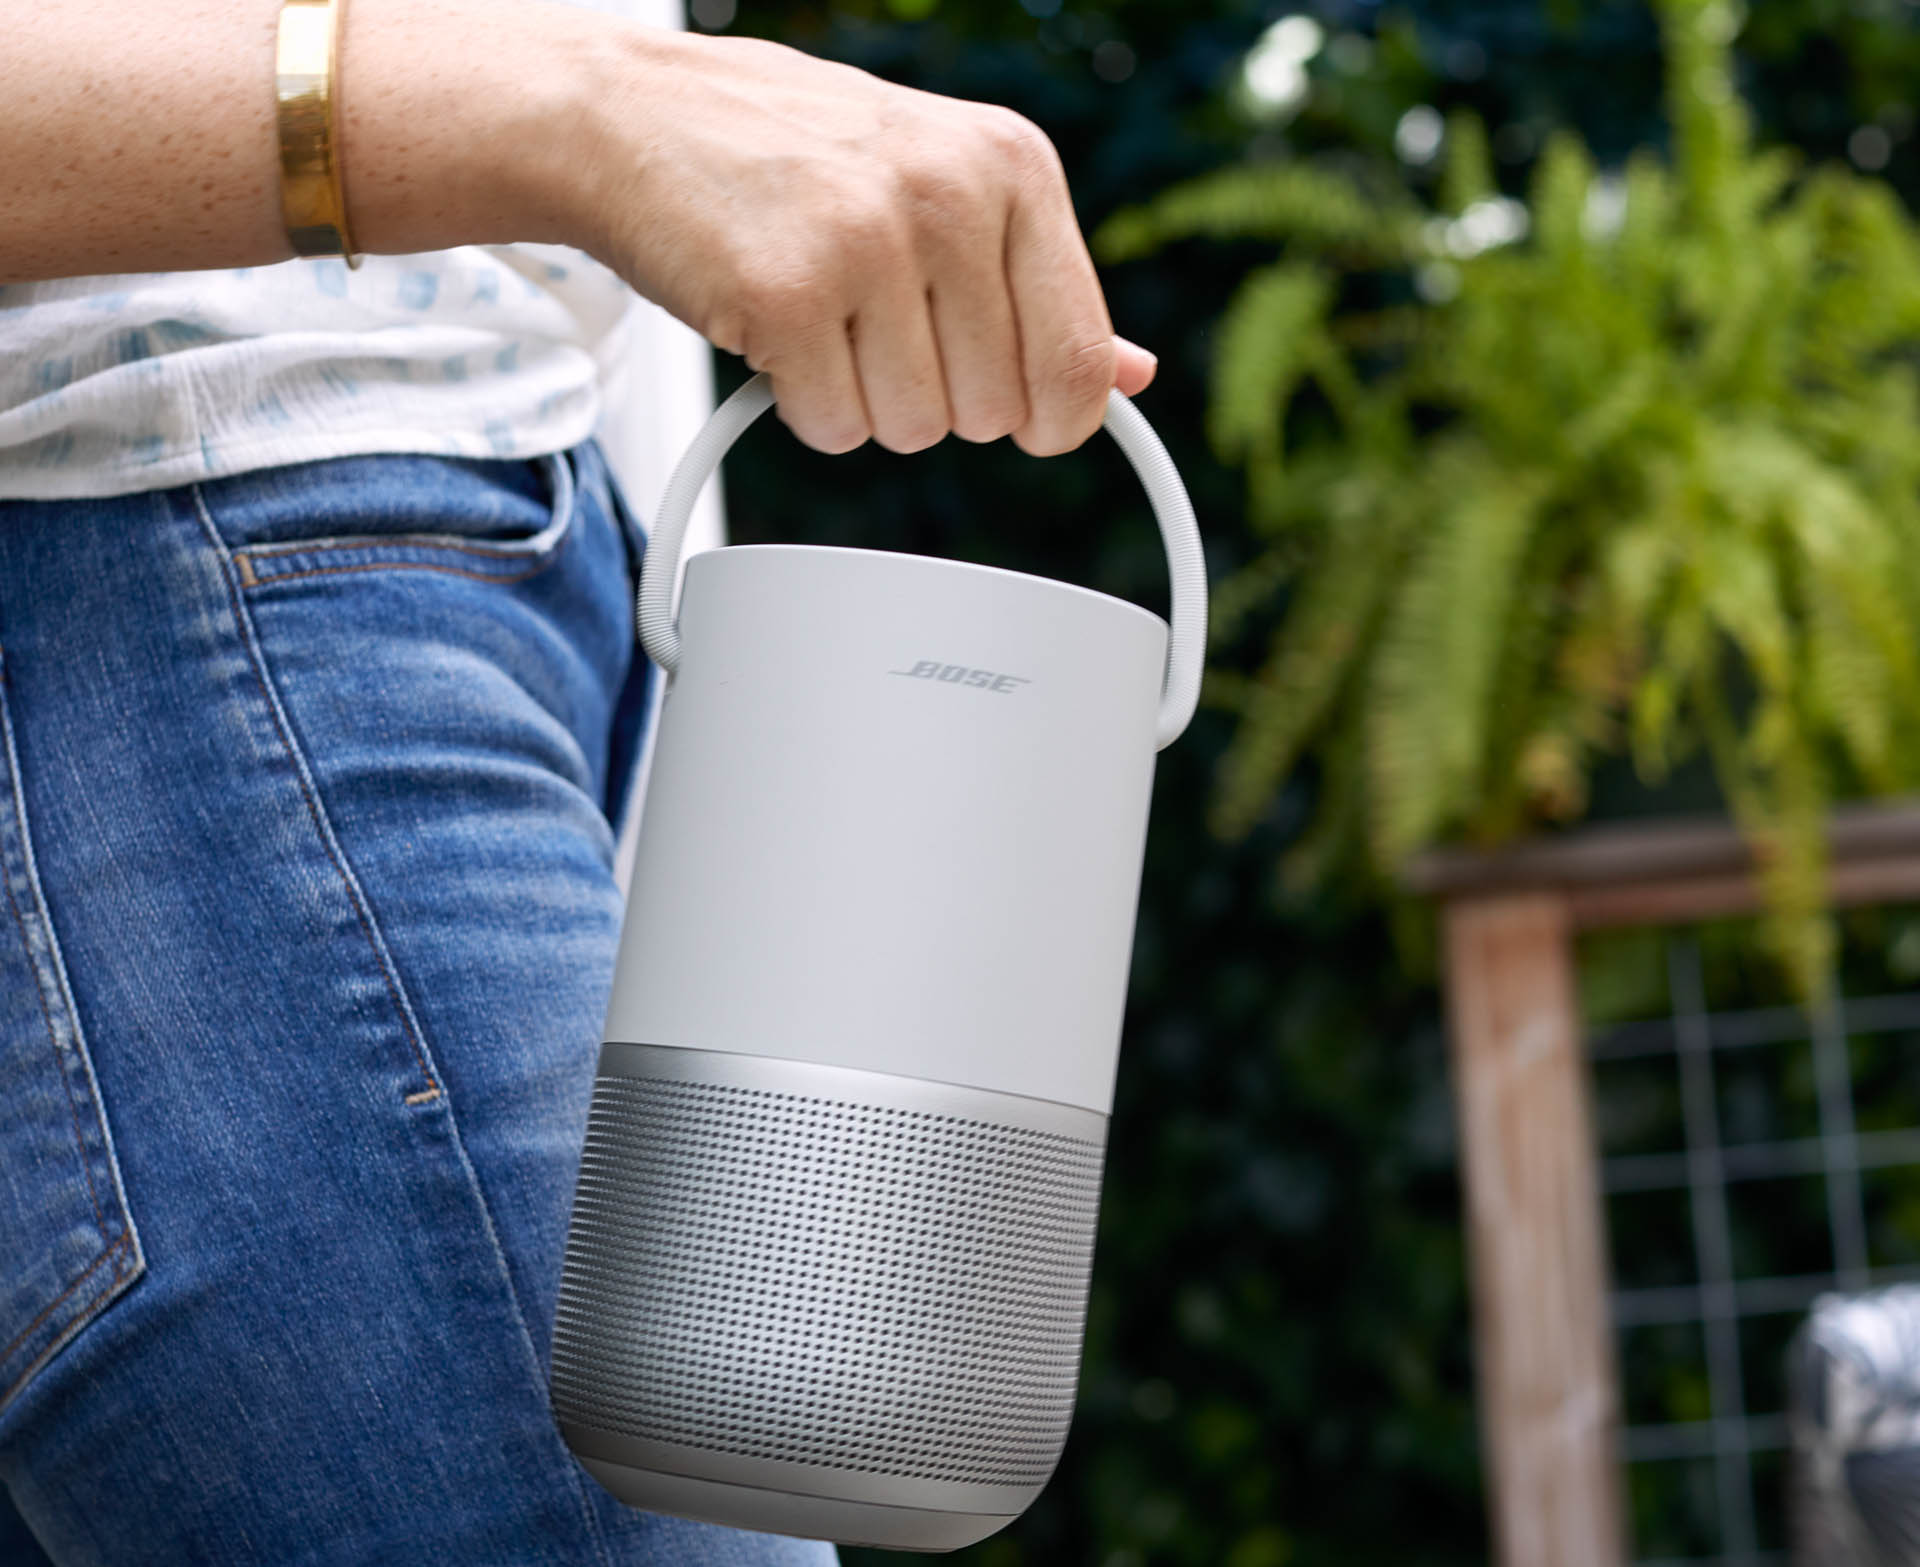 Compared to the Sonos Move, the new Bose speaker is both smaller and lighter, making it more portable. Image: Bose.